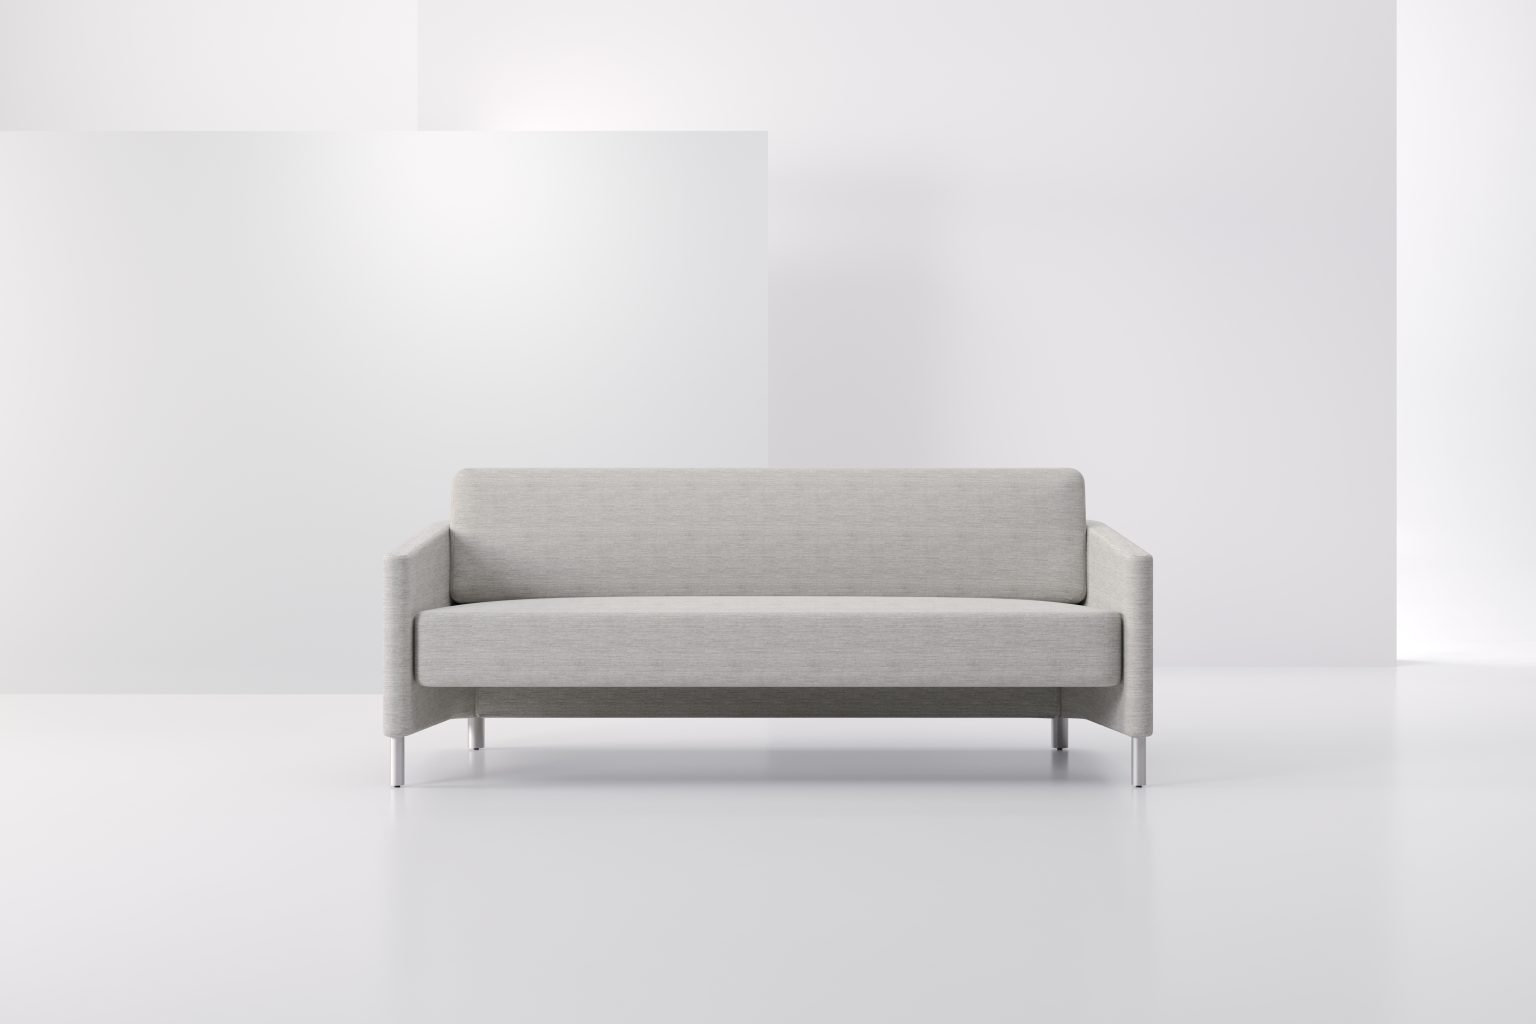 Rochester Sofa Product Image 2